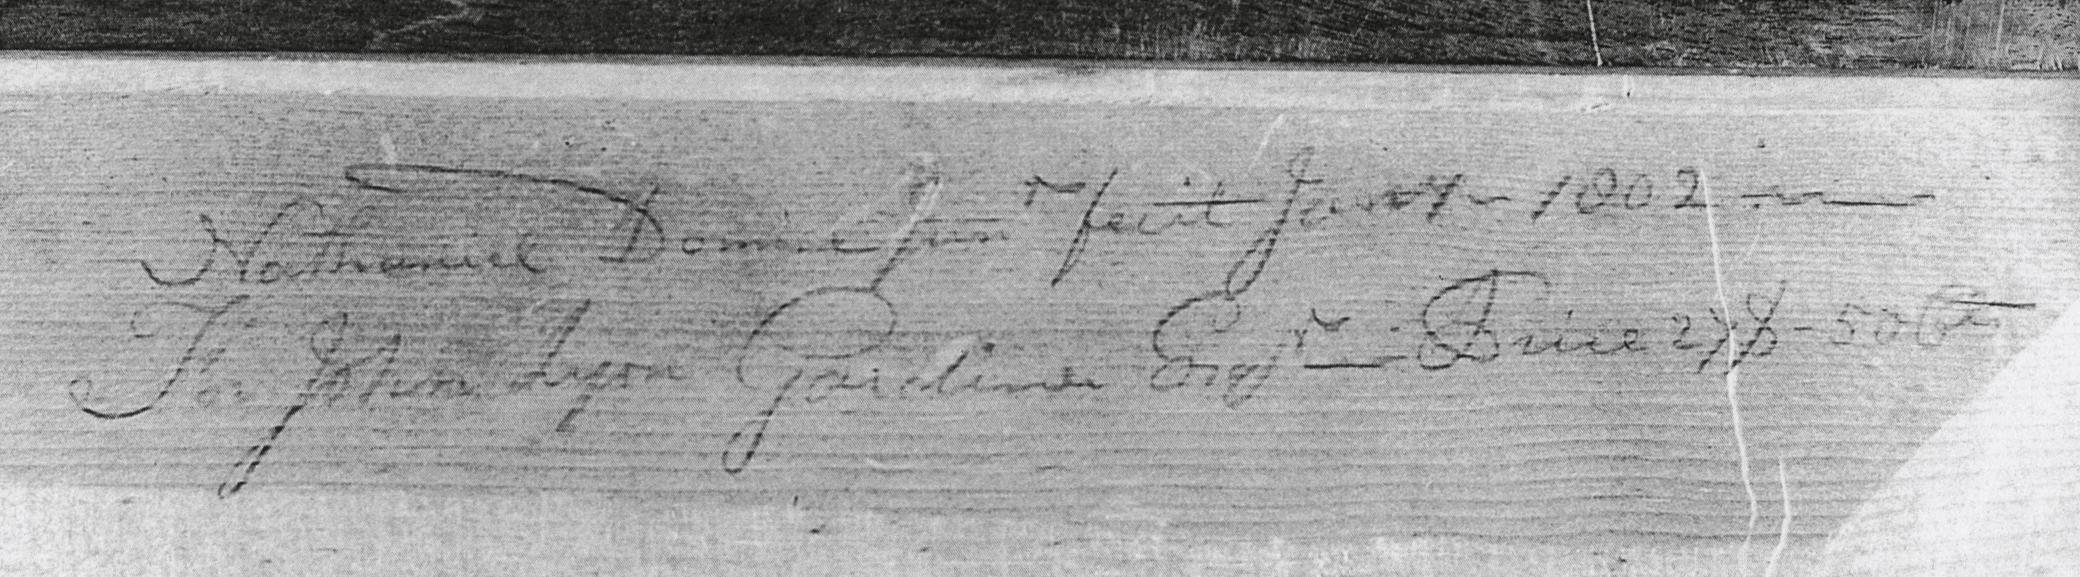 Black and white photograph of an inscription on a desk.